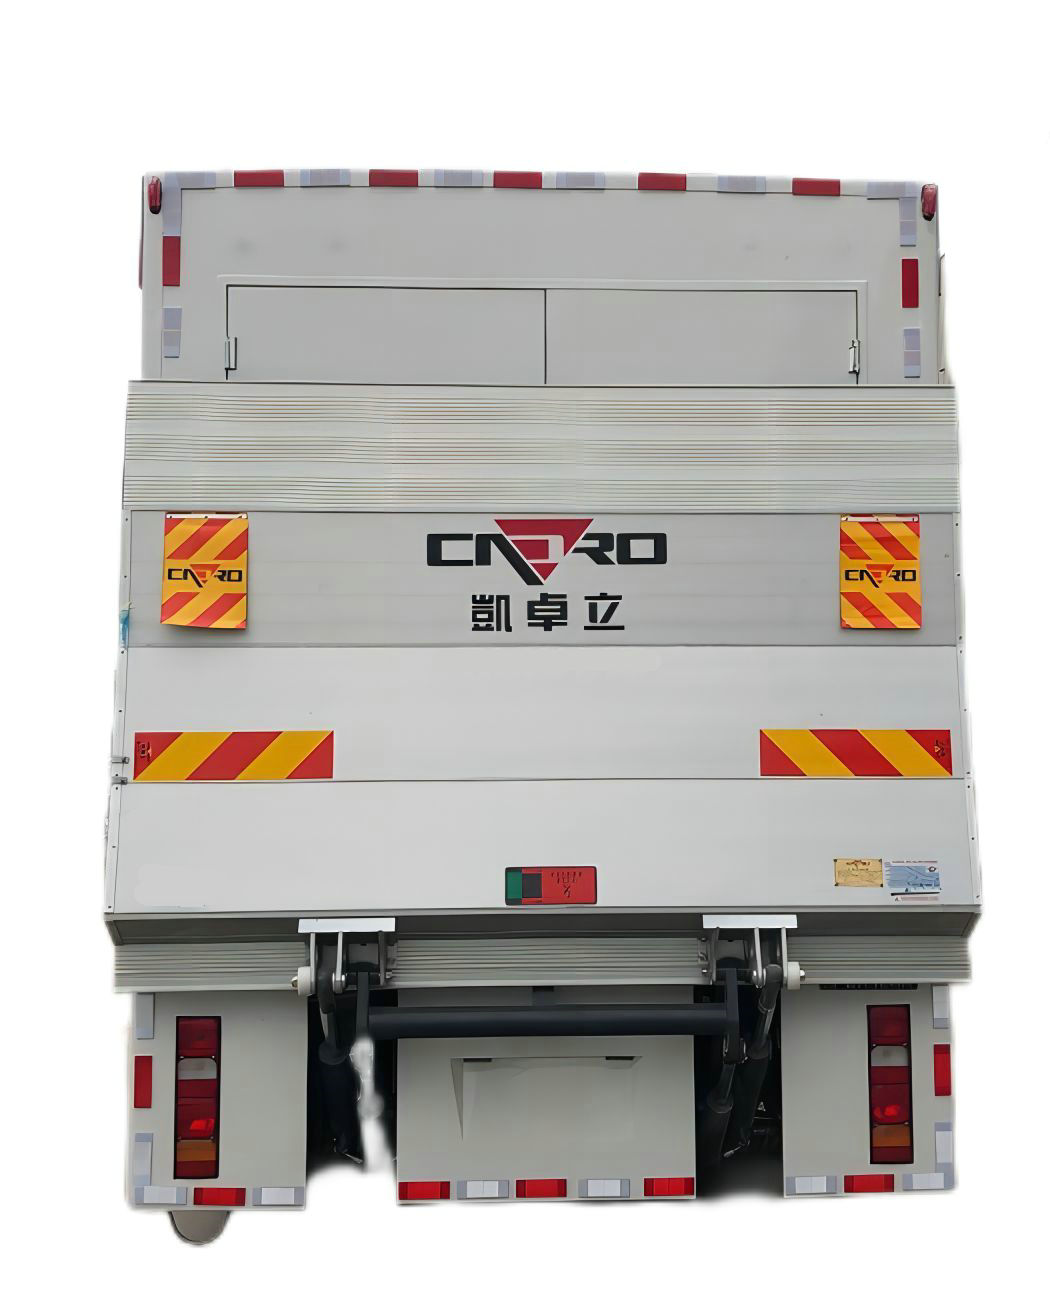 Customizing SITRAK Water Treatment Truck with Water Purification Equipment